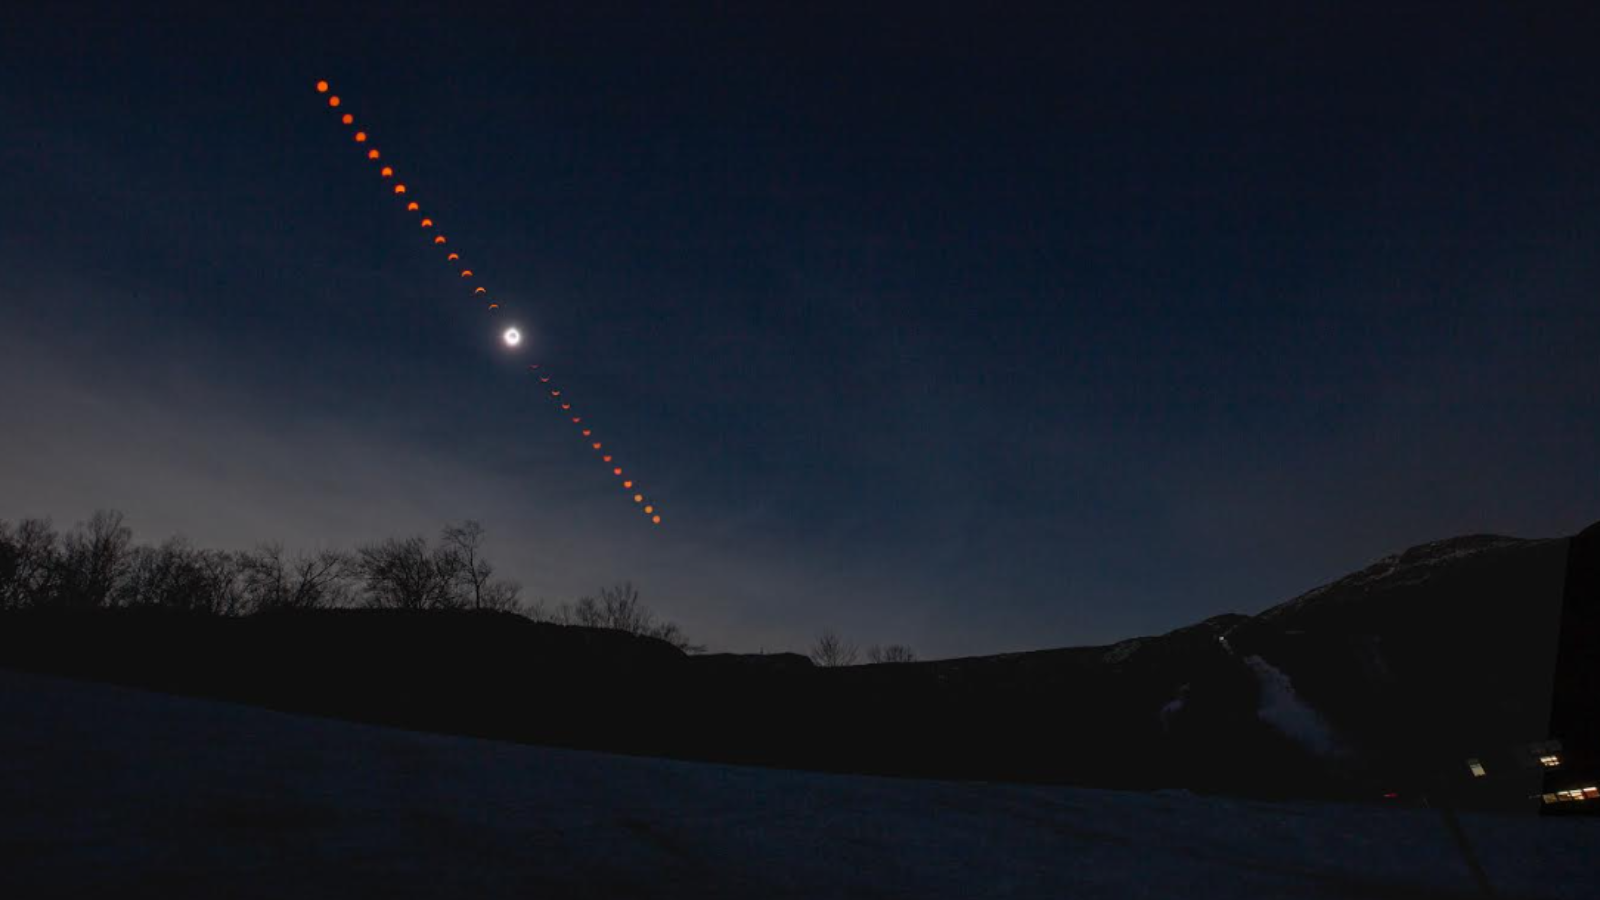 The total solar eclispe on April 8 as seen over Stowe, Vermont